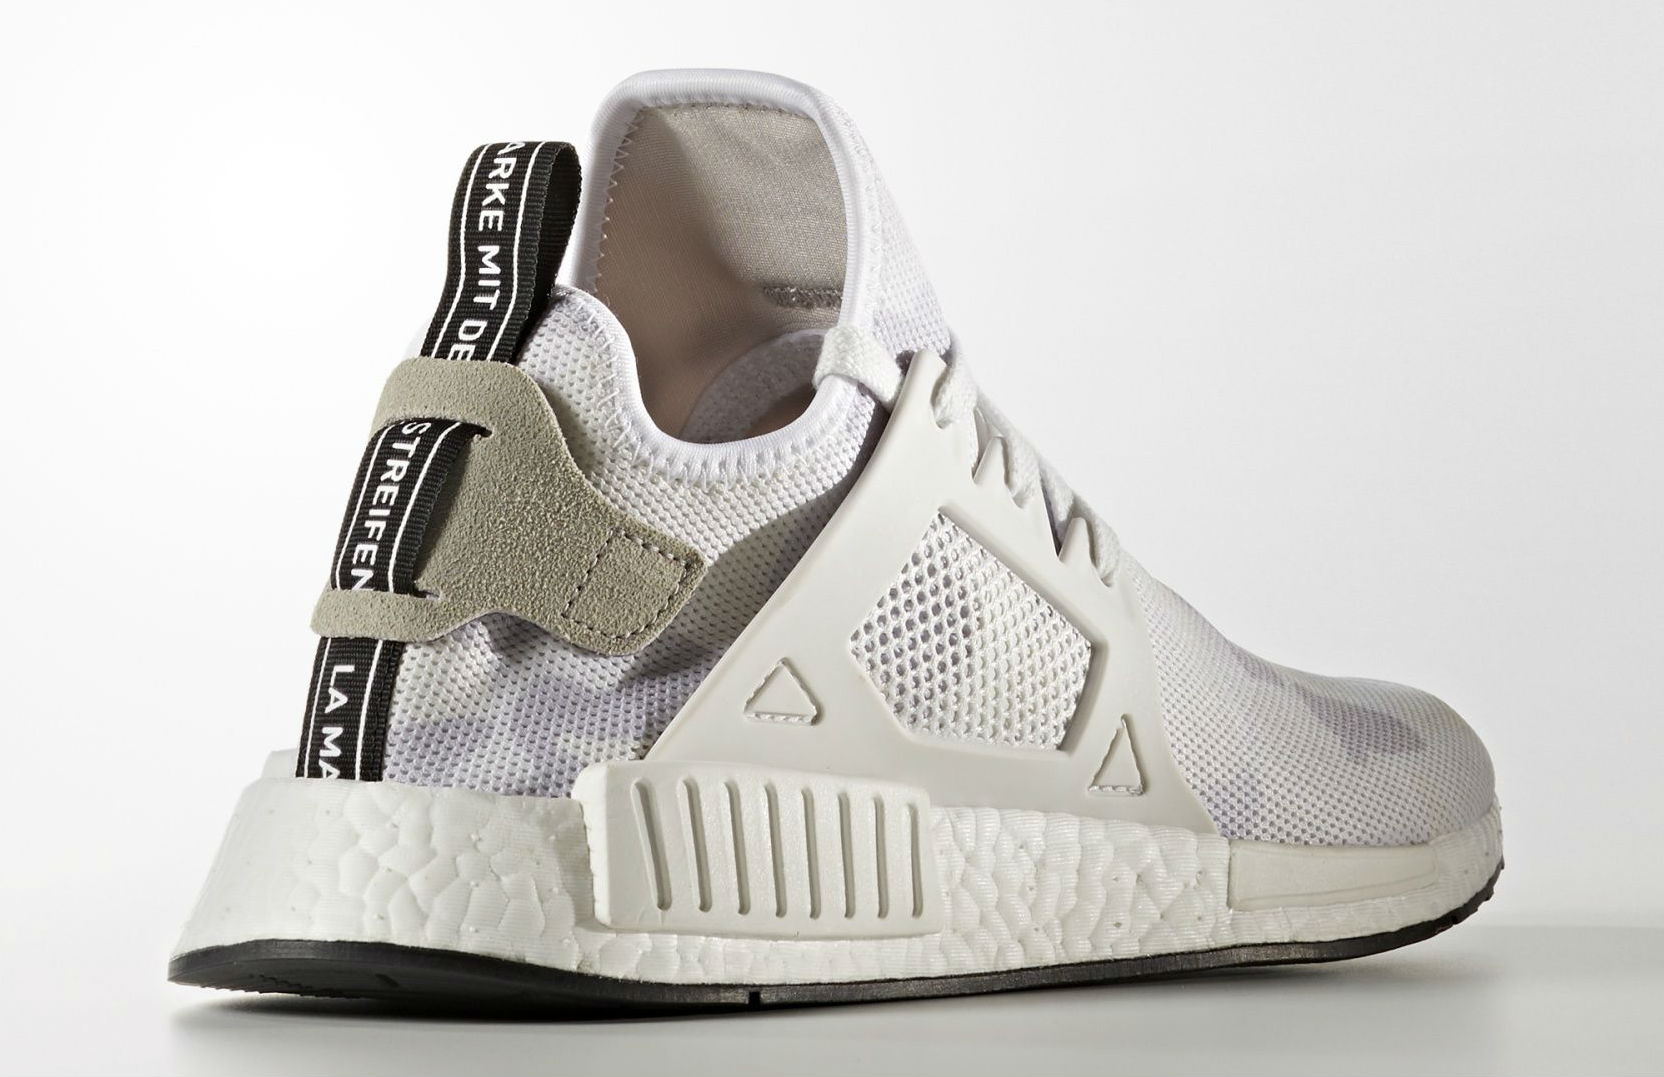 inch succes søn Camouflage Hits the adidas NMD XR1 This Fall - WearTesters